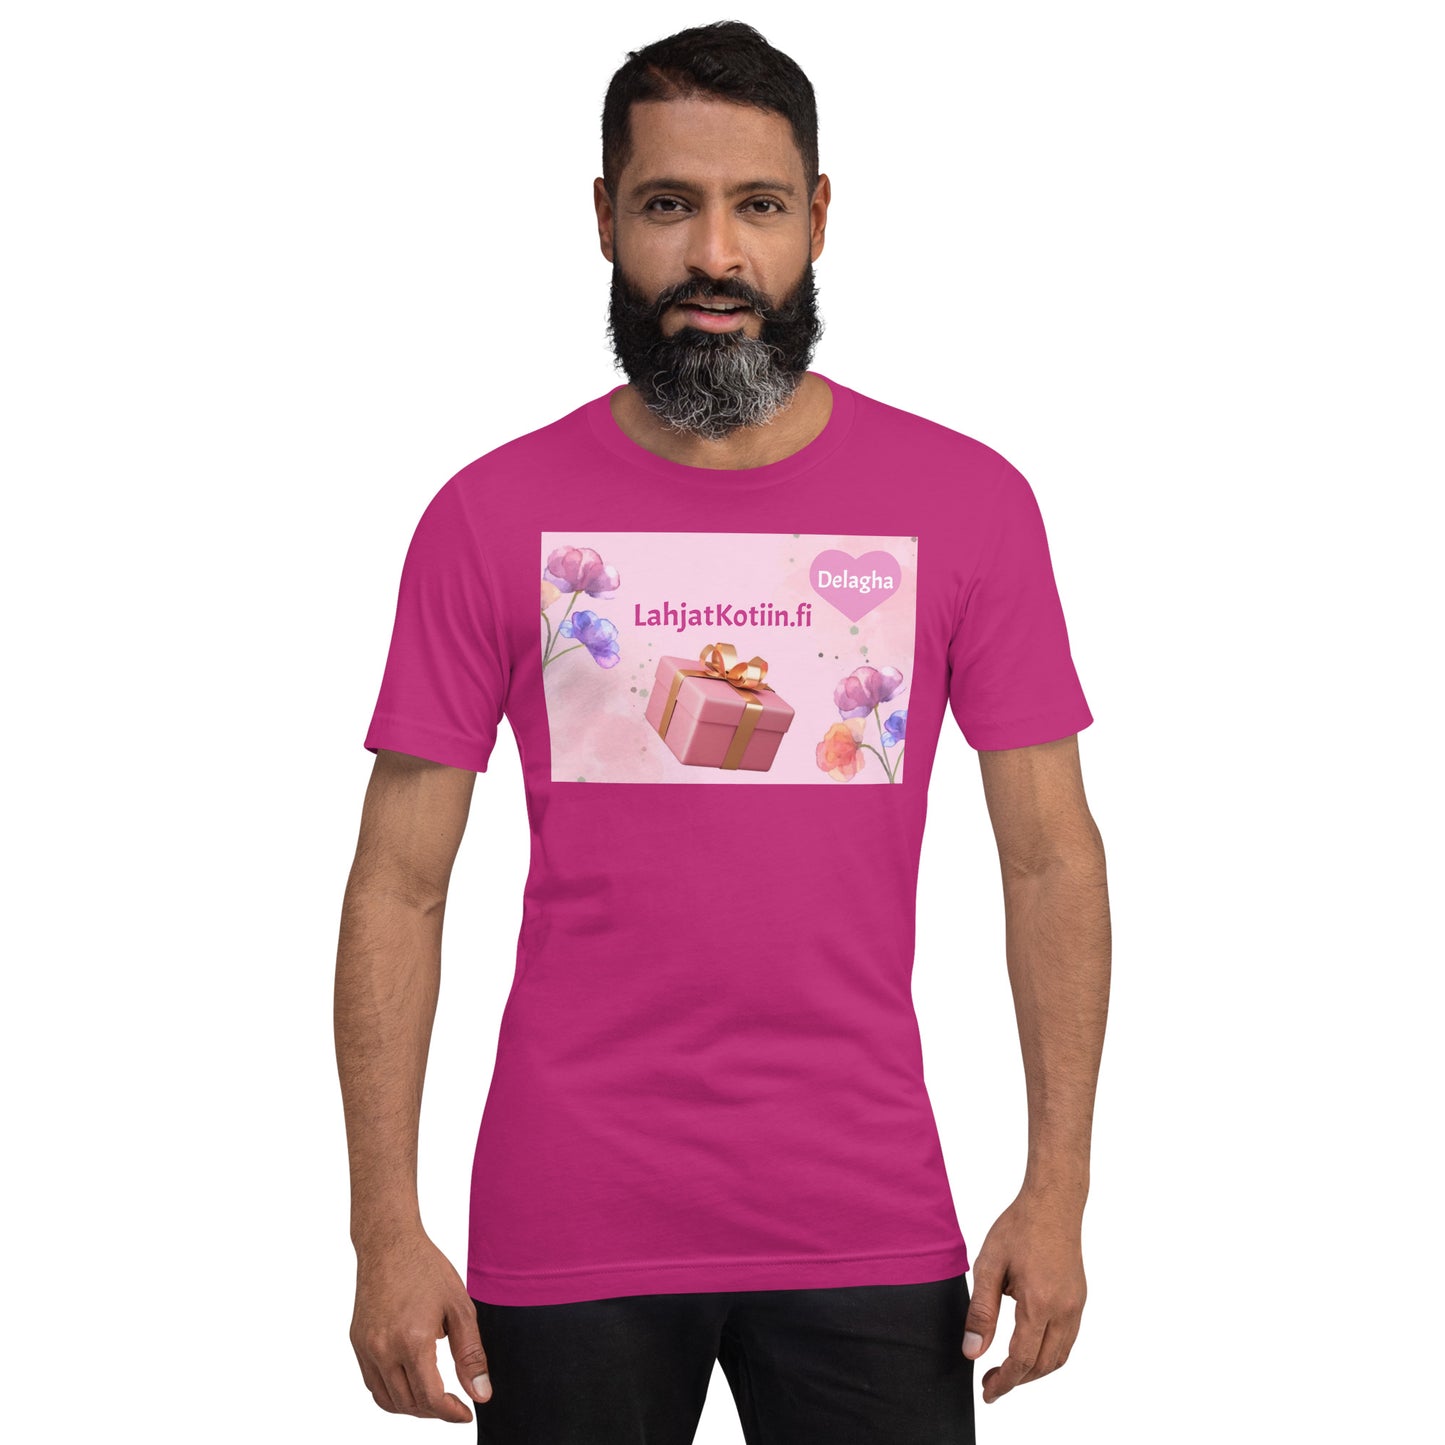 "Delagha IN THE BACKGROUND" t-shirt